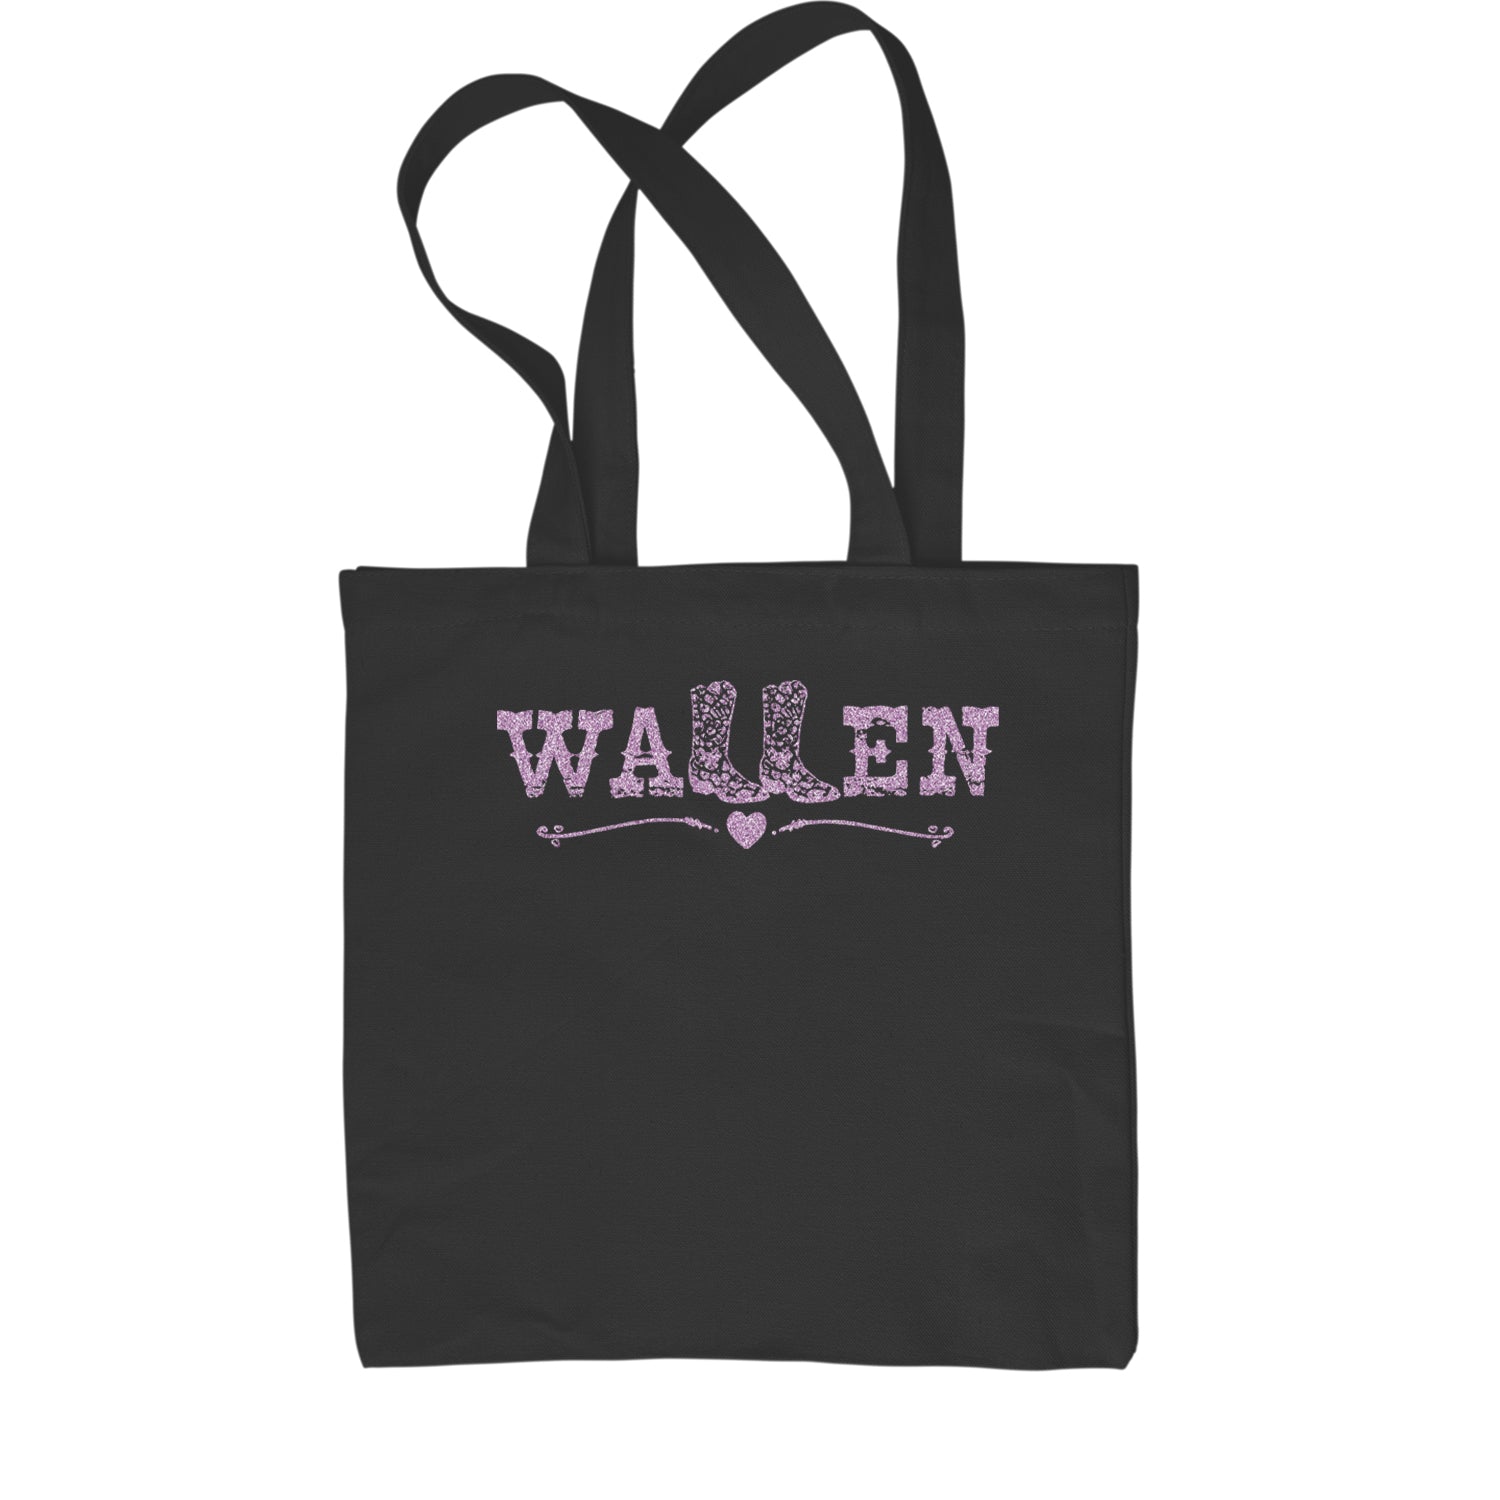 Glitter Wallen Cowgirl Boots Country Music Western Shopping Tote Bag